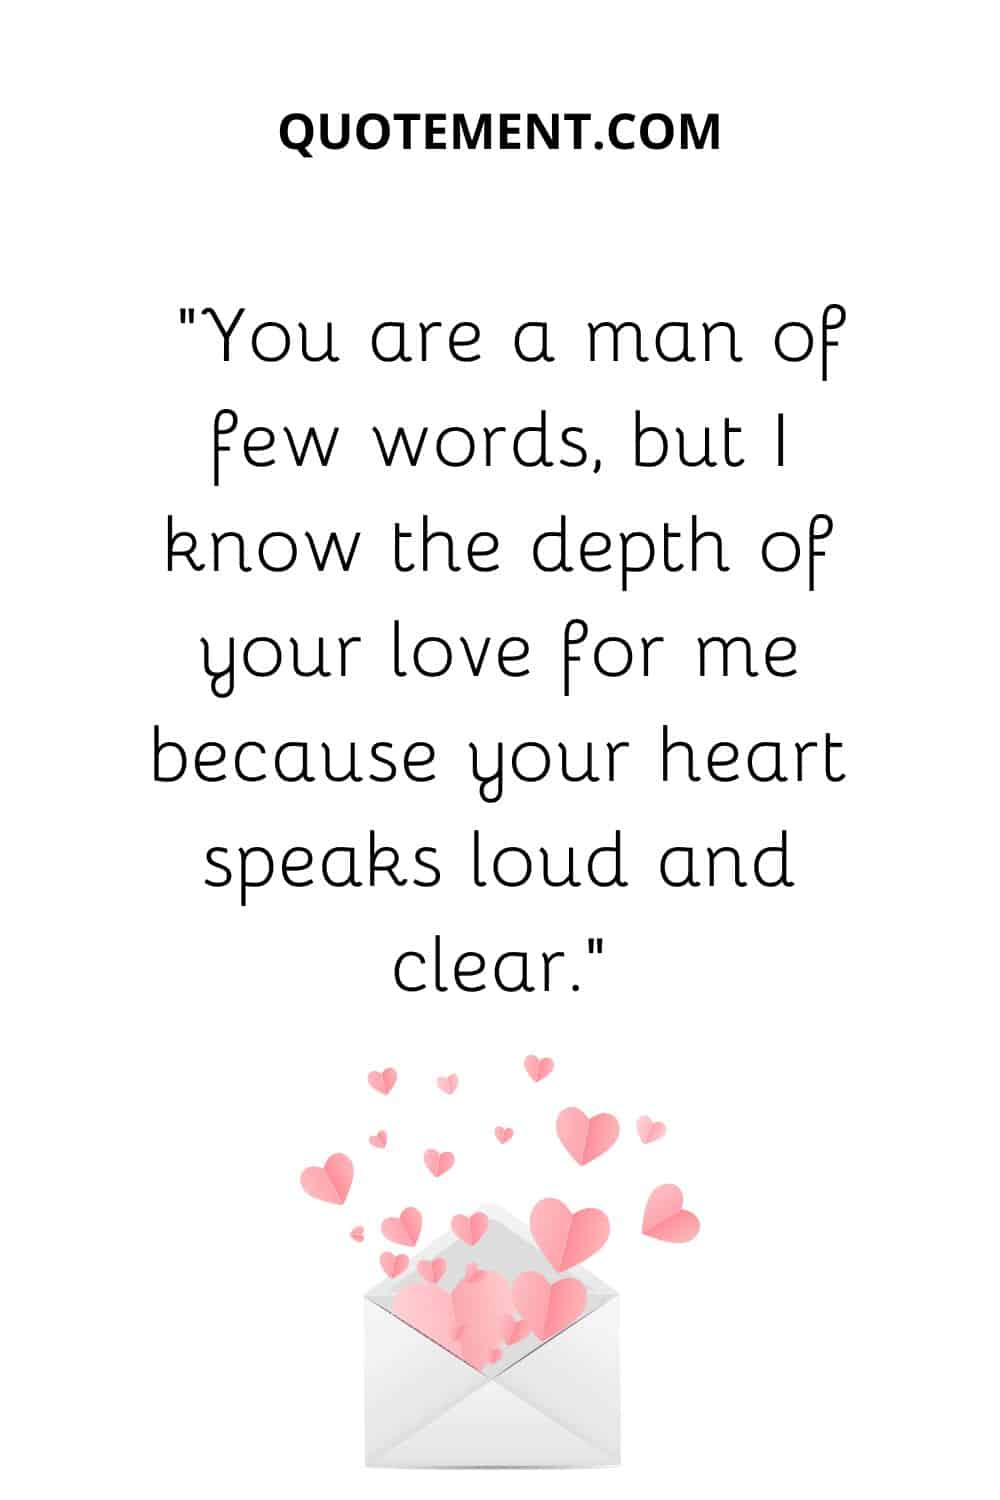 “You are a man of few words, but I know the depth of your love for me because your heart speaks loud and clear.”